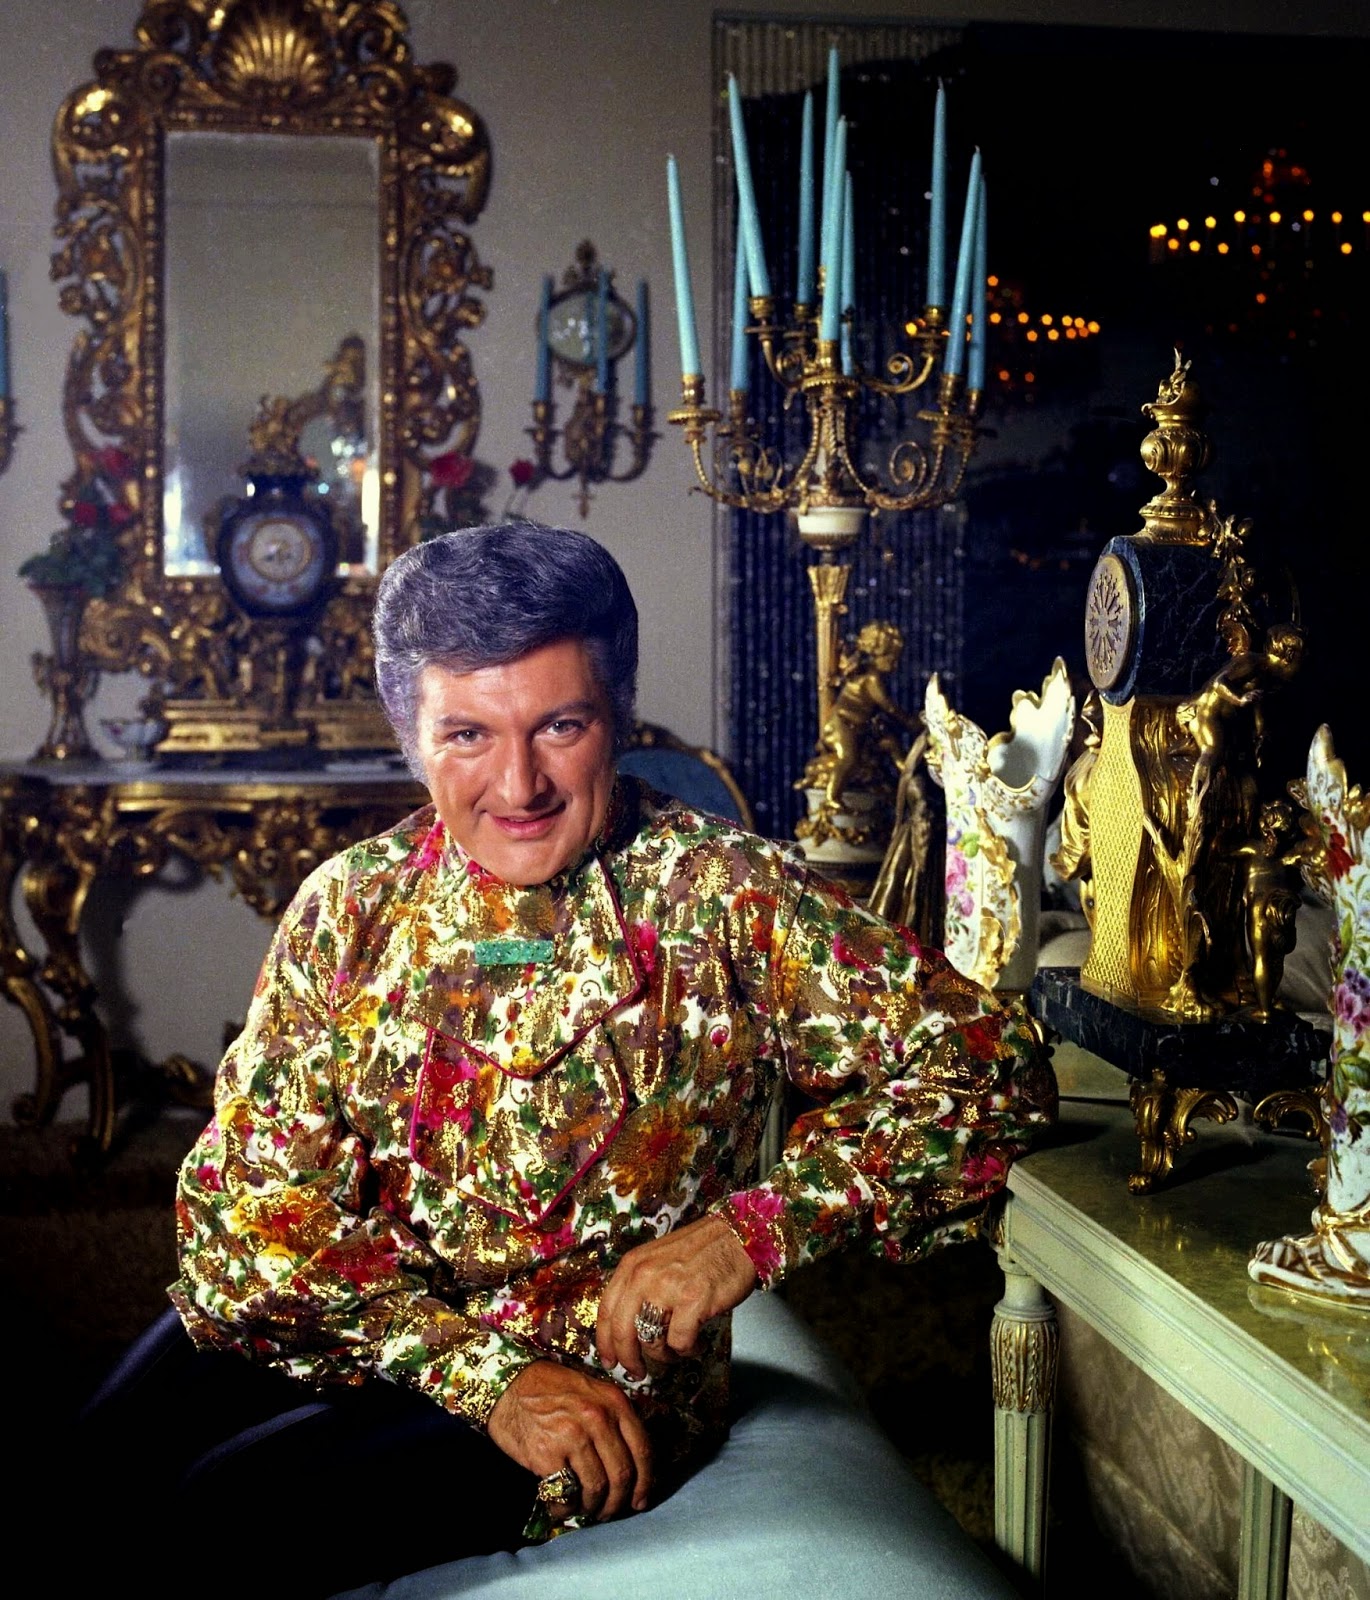 Liberace was gay but publicly denied his homosexual, died of pneumonia as a result of AIDS